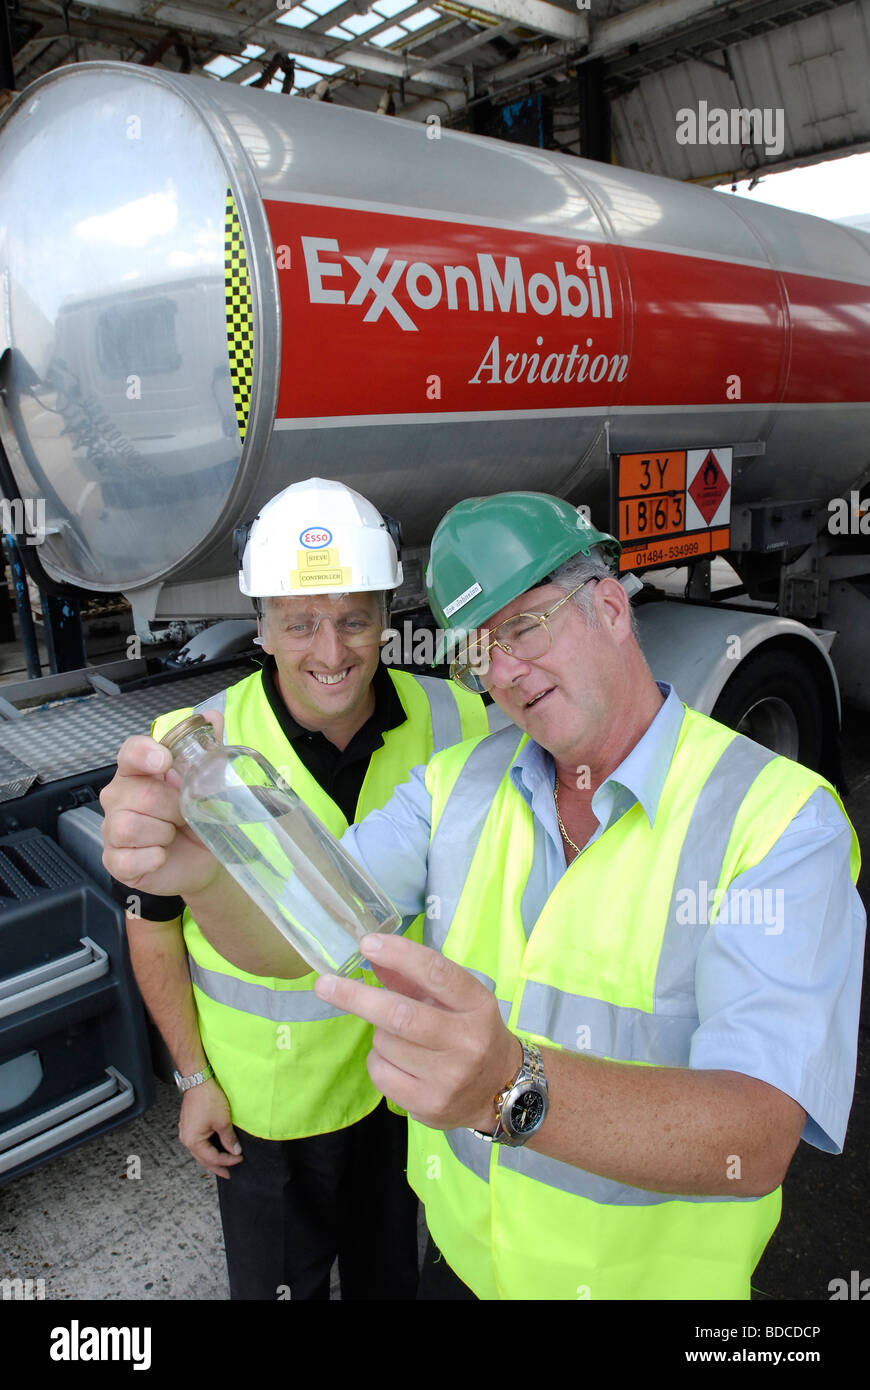 Technicians checking a sample of aviation fuel Stock Photo